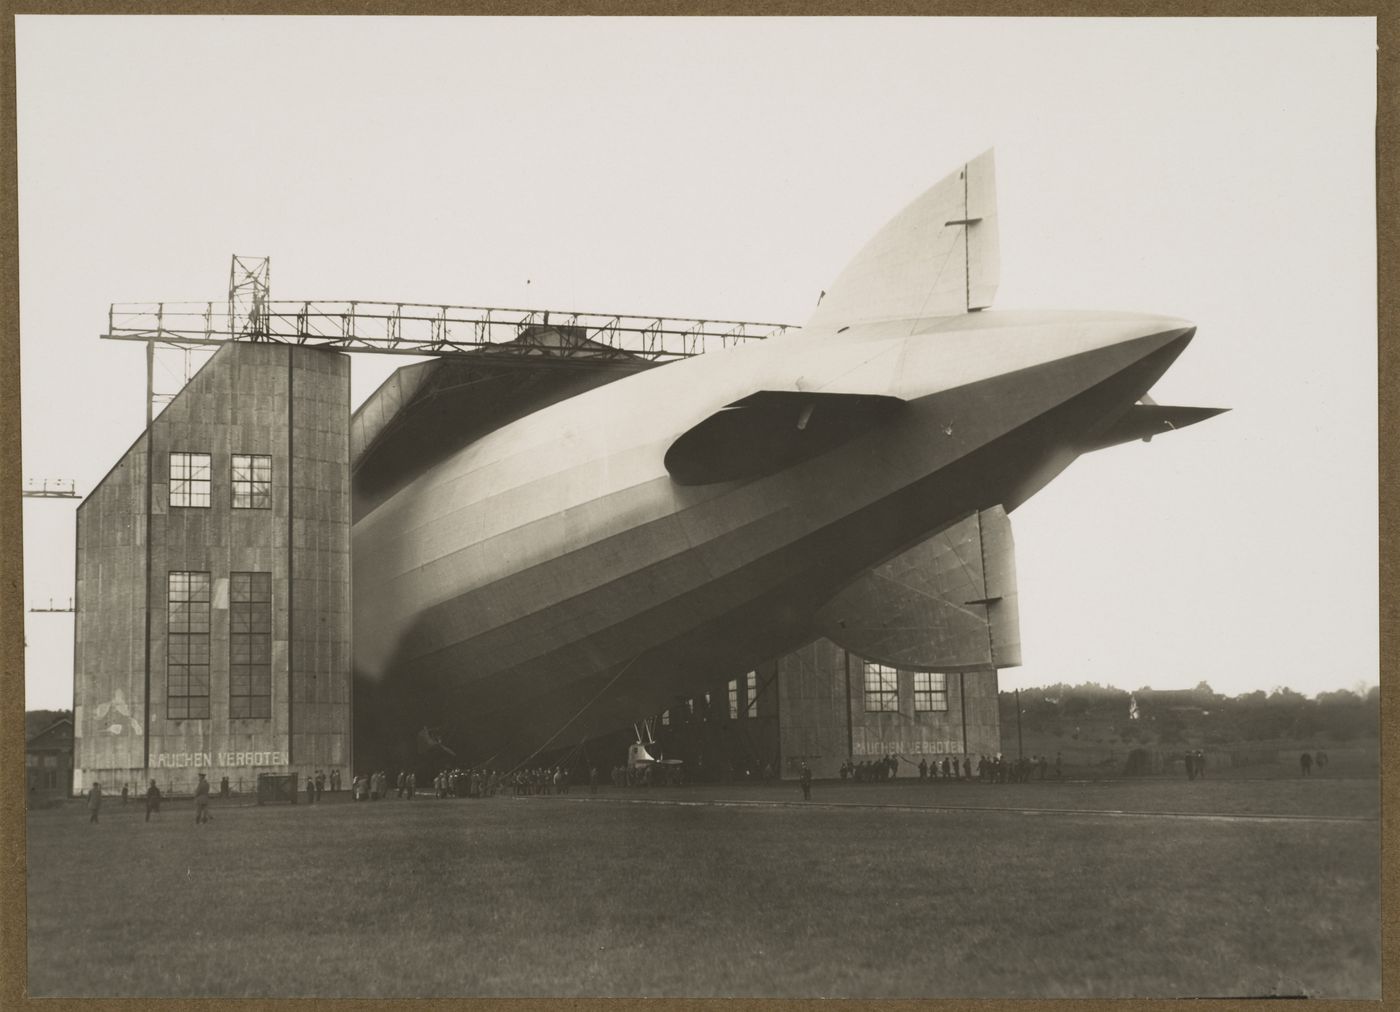 View of the tail end of zeppelin LZ 126 leaving the hangar